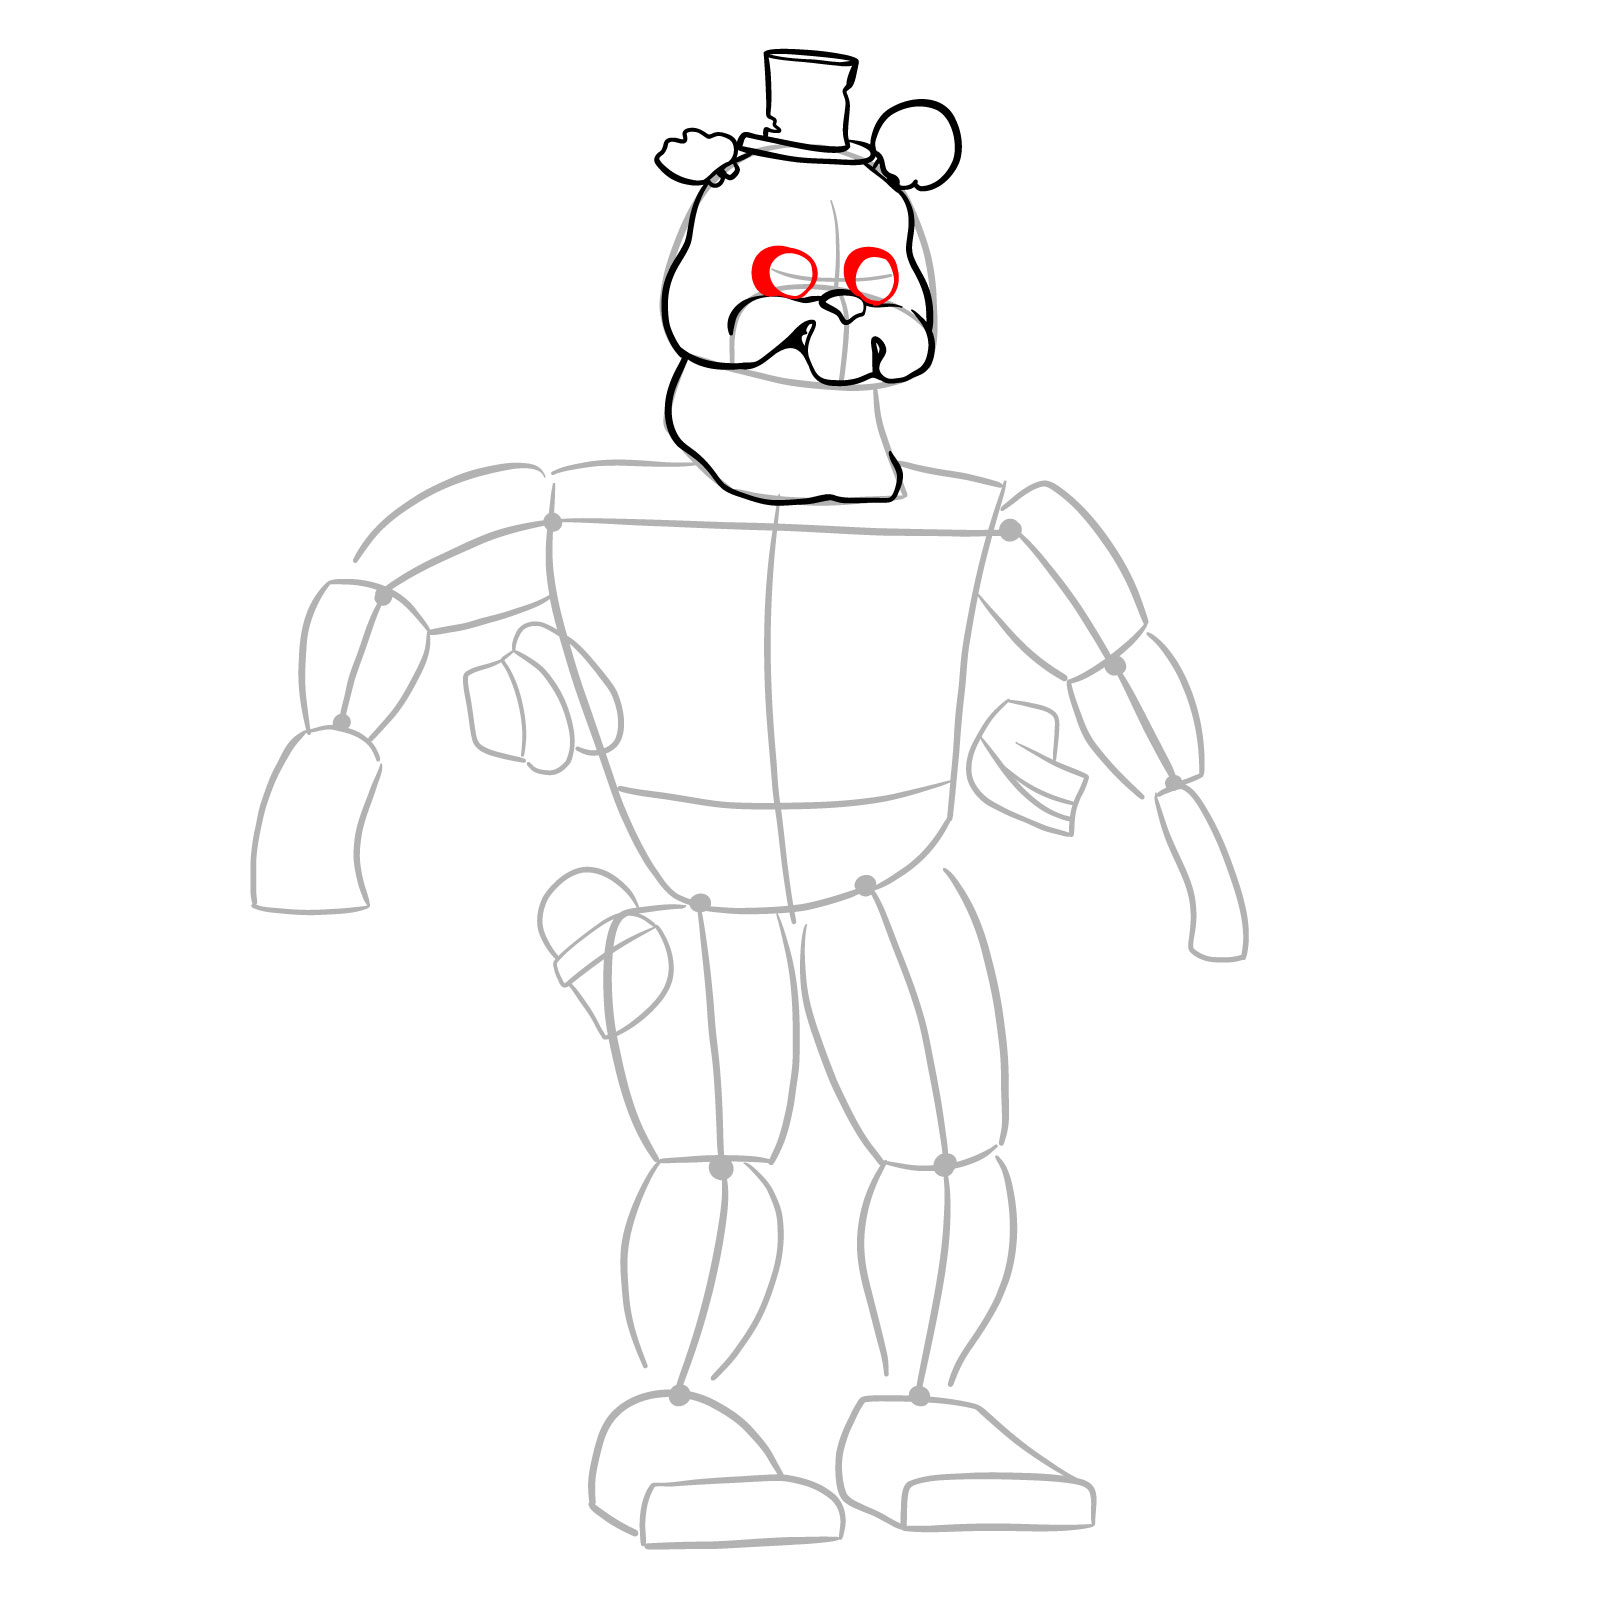 How to draw Nightmare Freddy - step 09